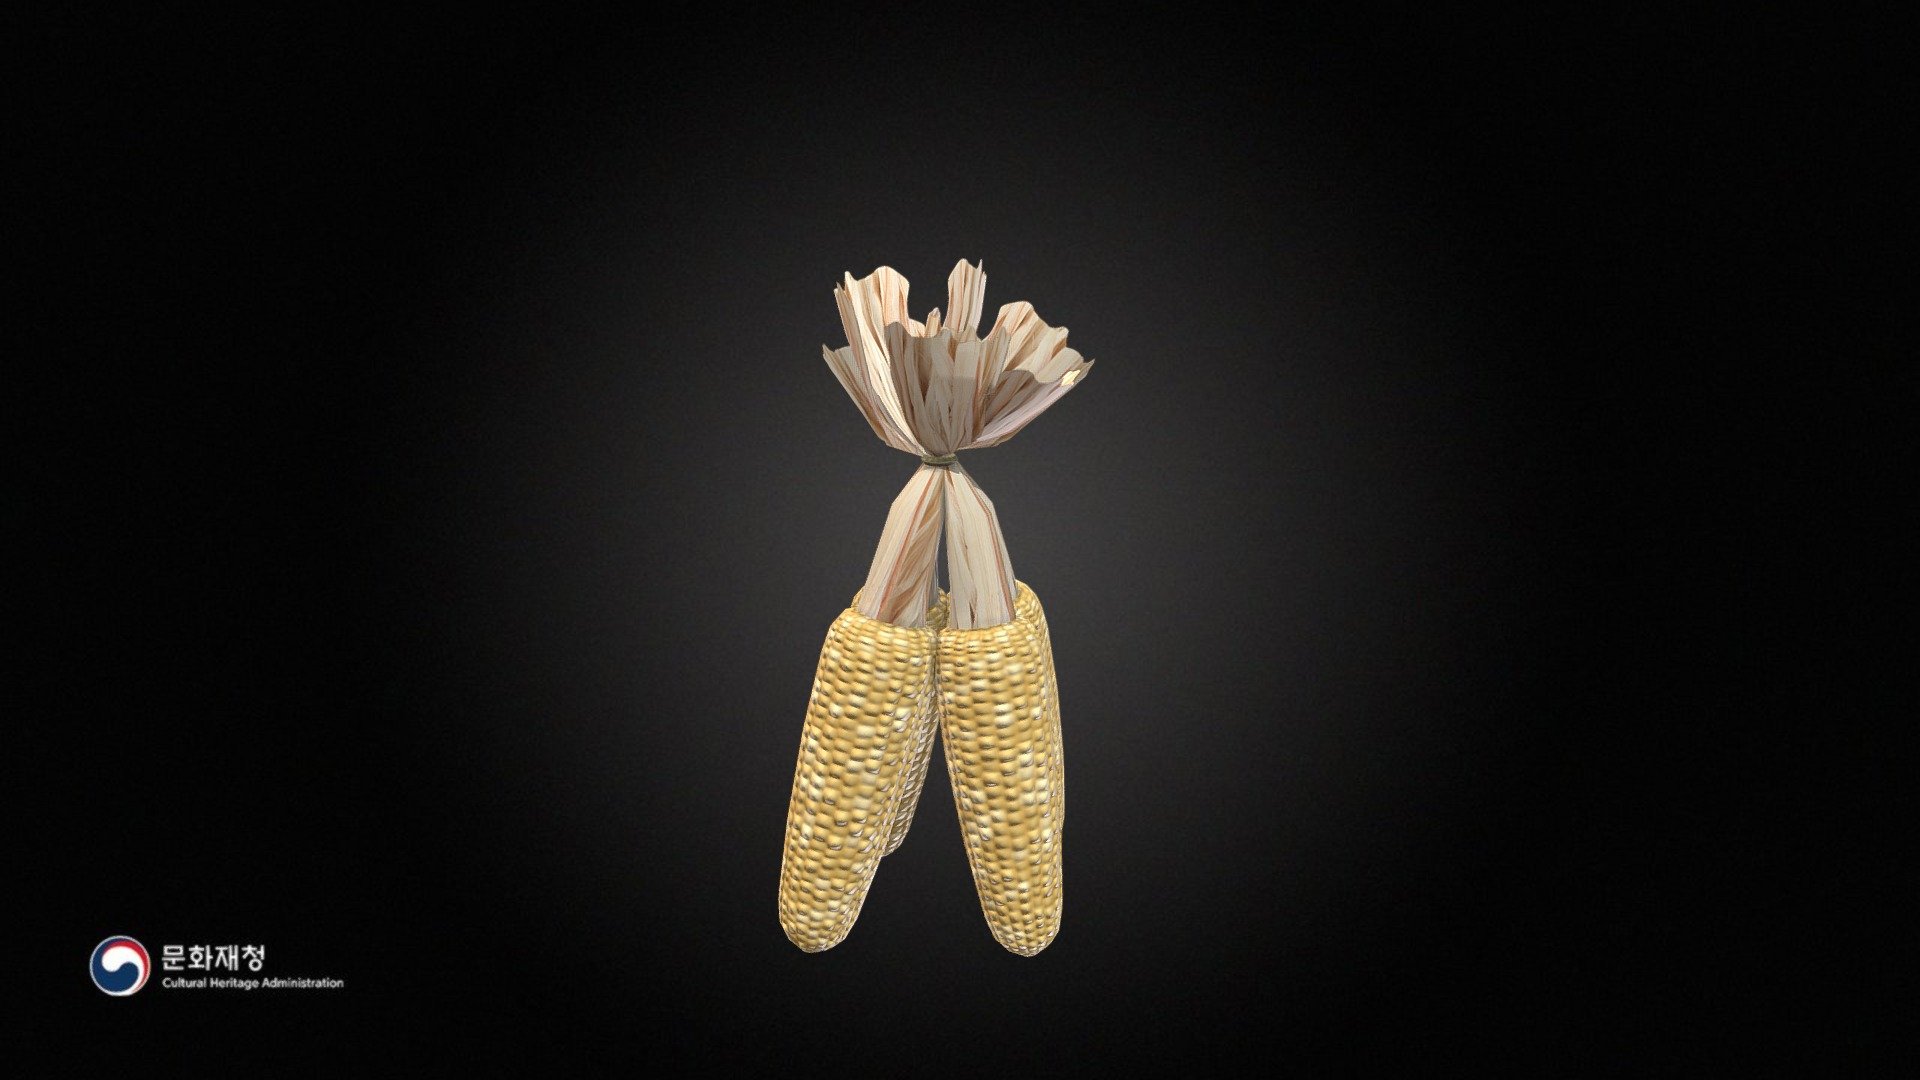 Corn


옥수수



An annual herb belonging to the rice family.
The height ranges from 1 to 3 meters, and the stems are thick, hard-shelled, and filling.

Explanation Source : Encyclopedia of Korean Culture




&lt;문화재정보 링크&gt; - Corn - Download Free 3D model by National Heritage Administration (@NHA_Asset) 3d model